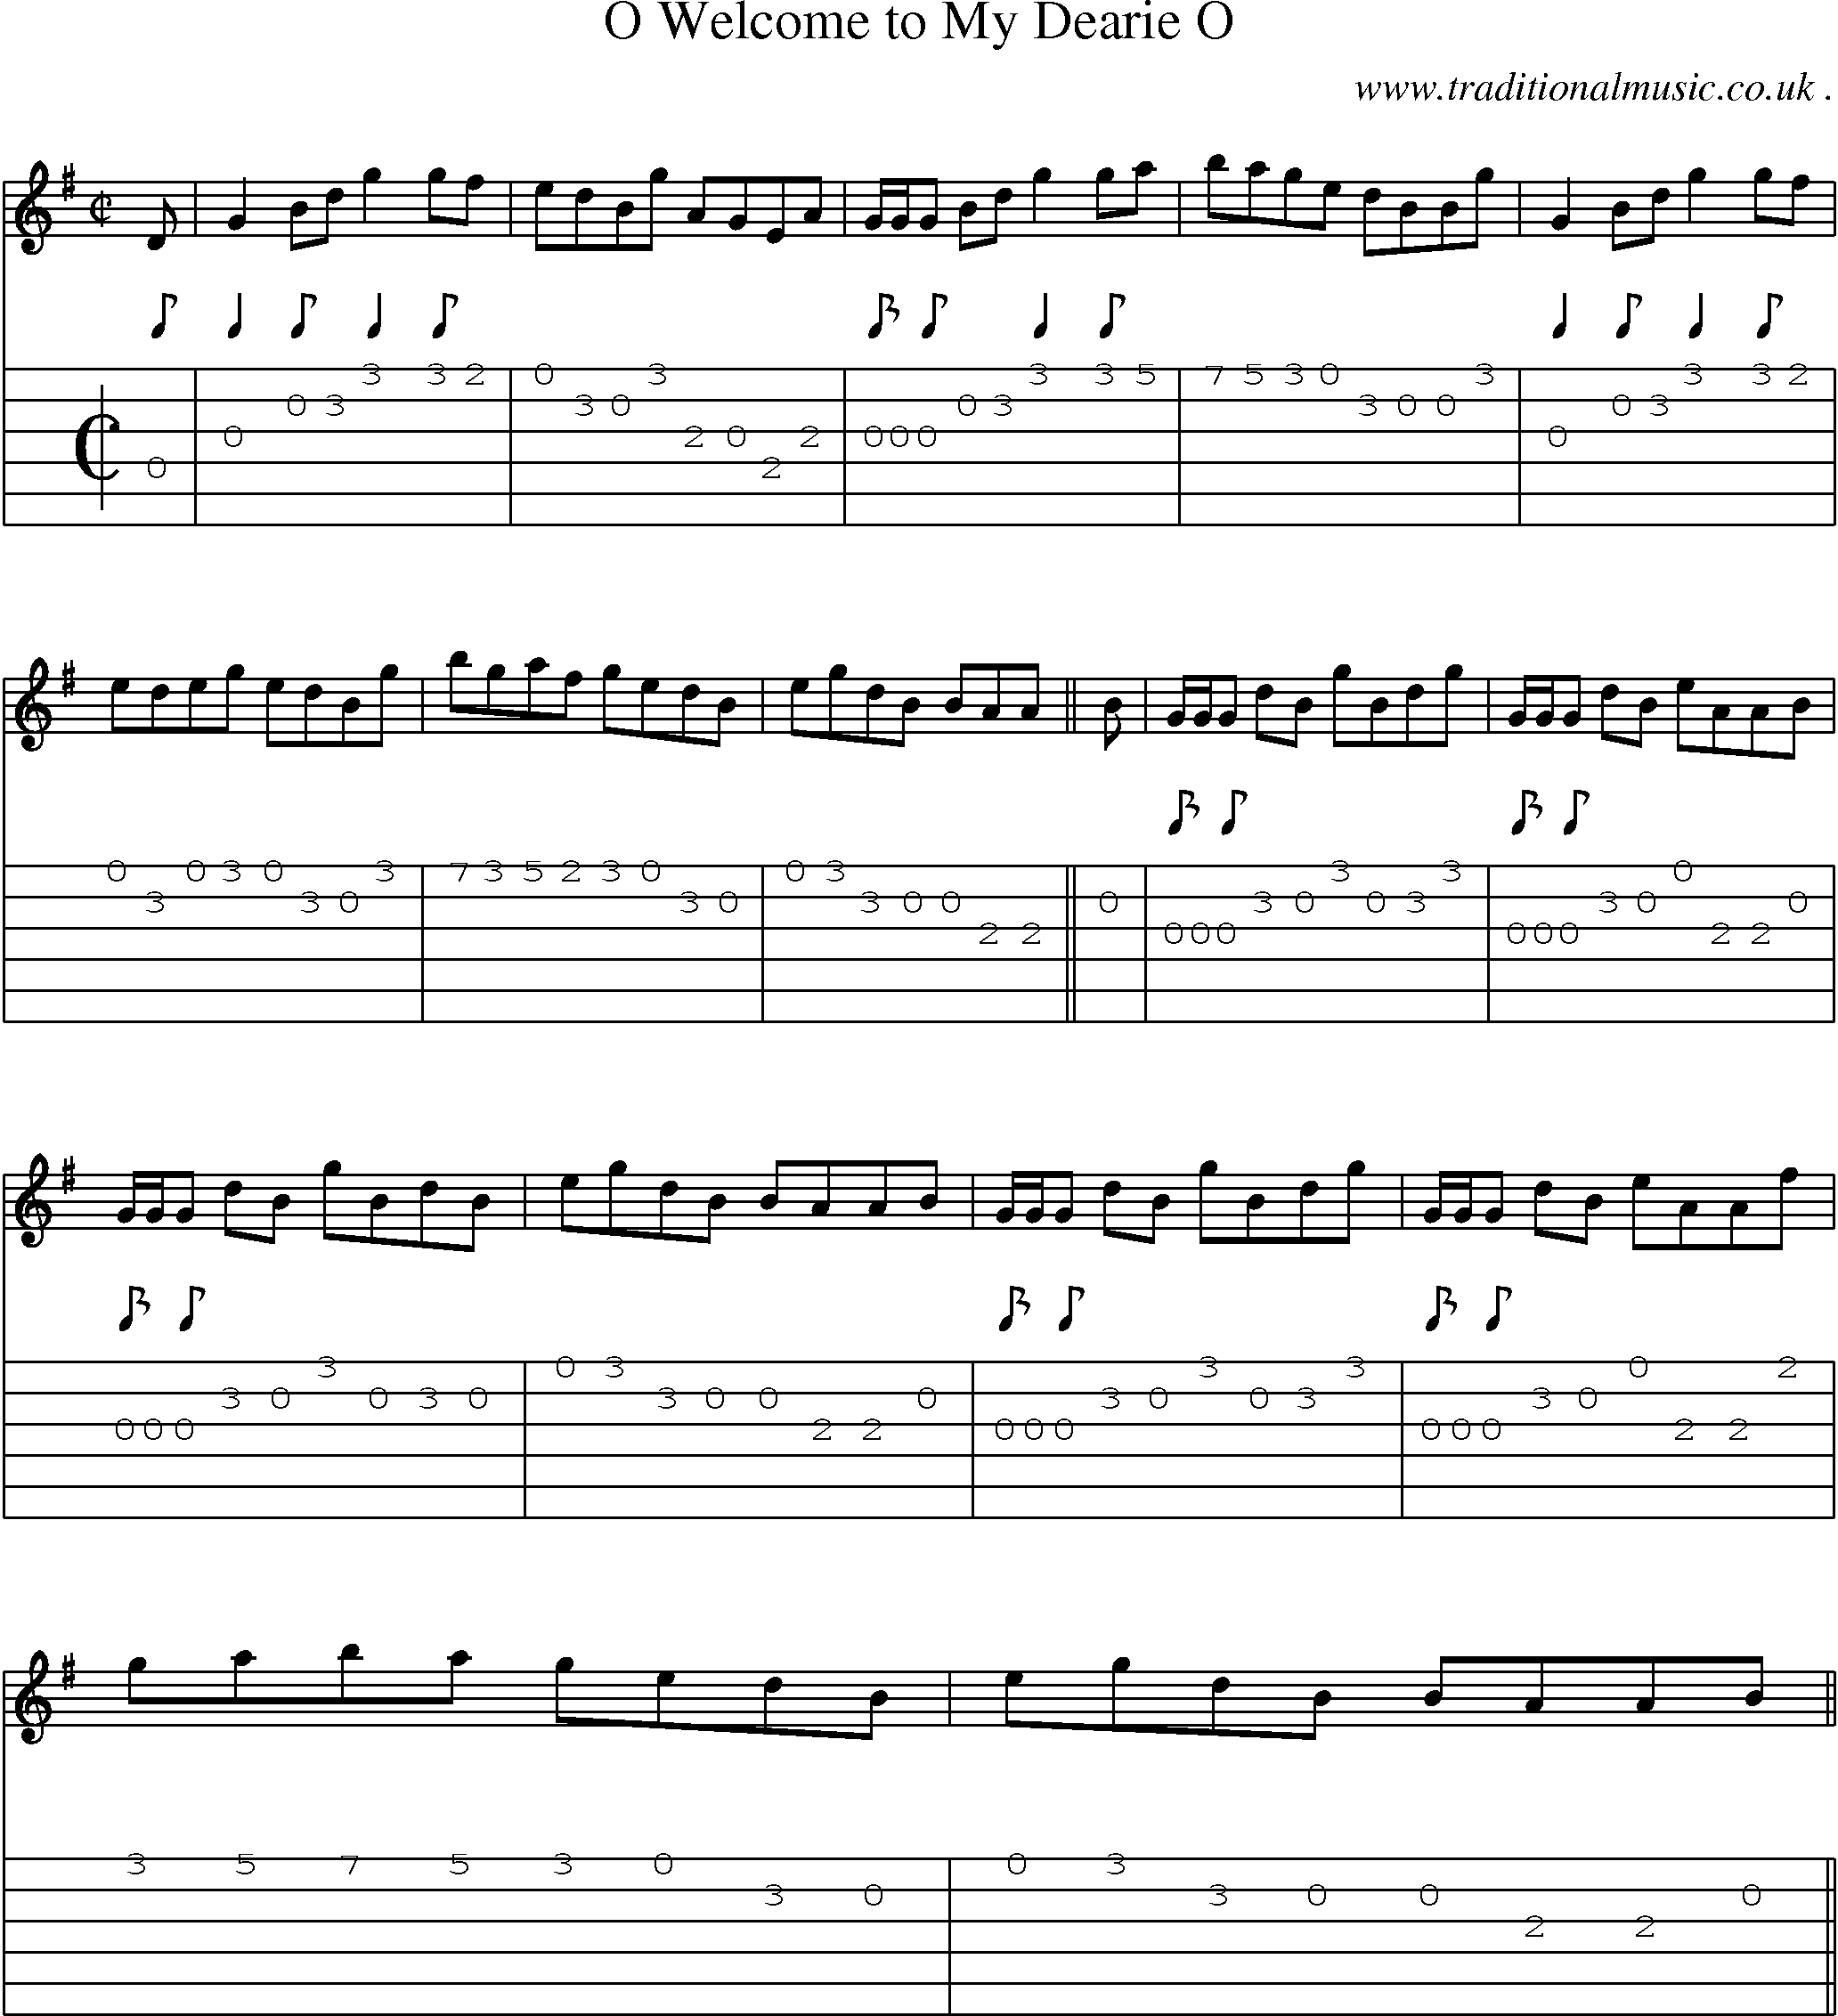 Sheet-music  score, Chords and Guitar Tabs for O Welcome To My Dearie O